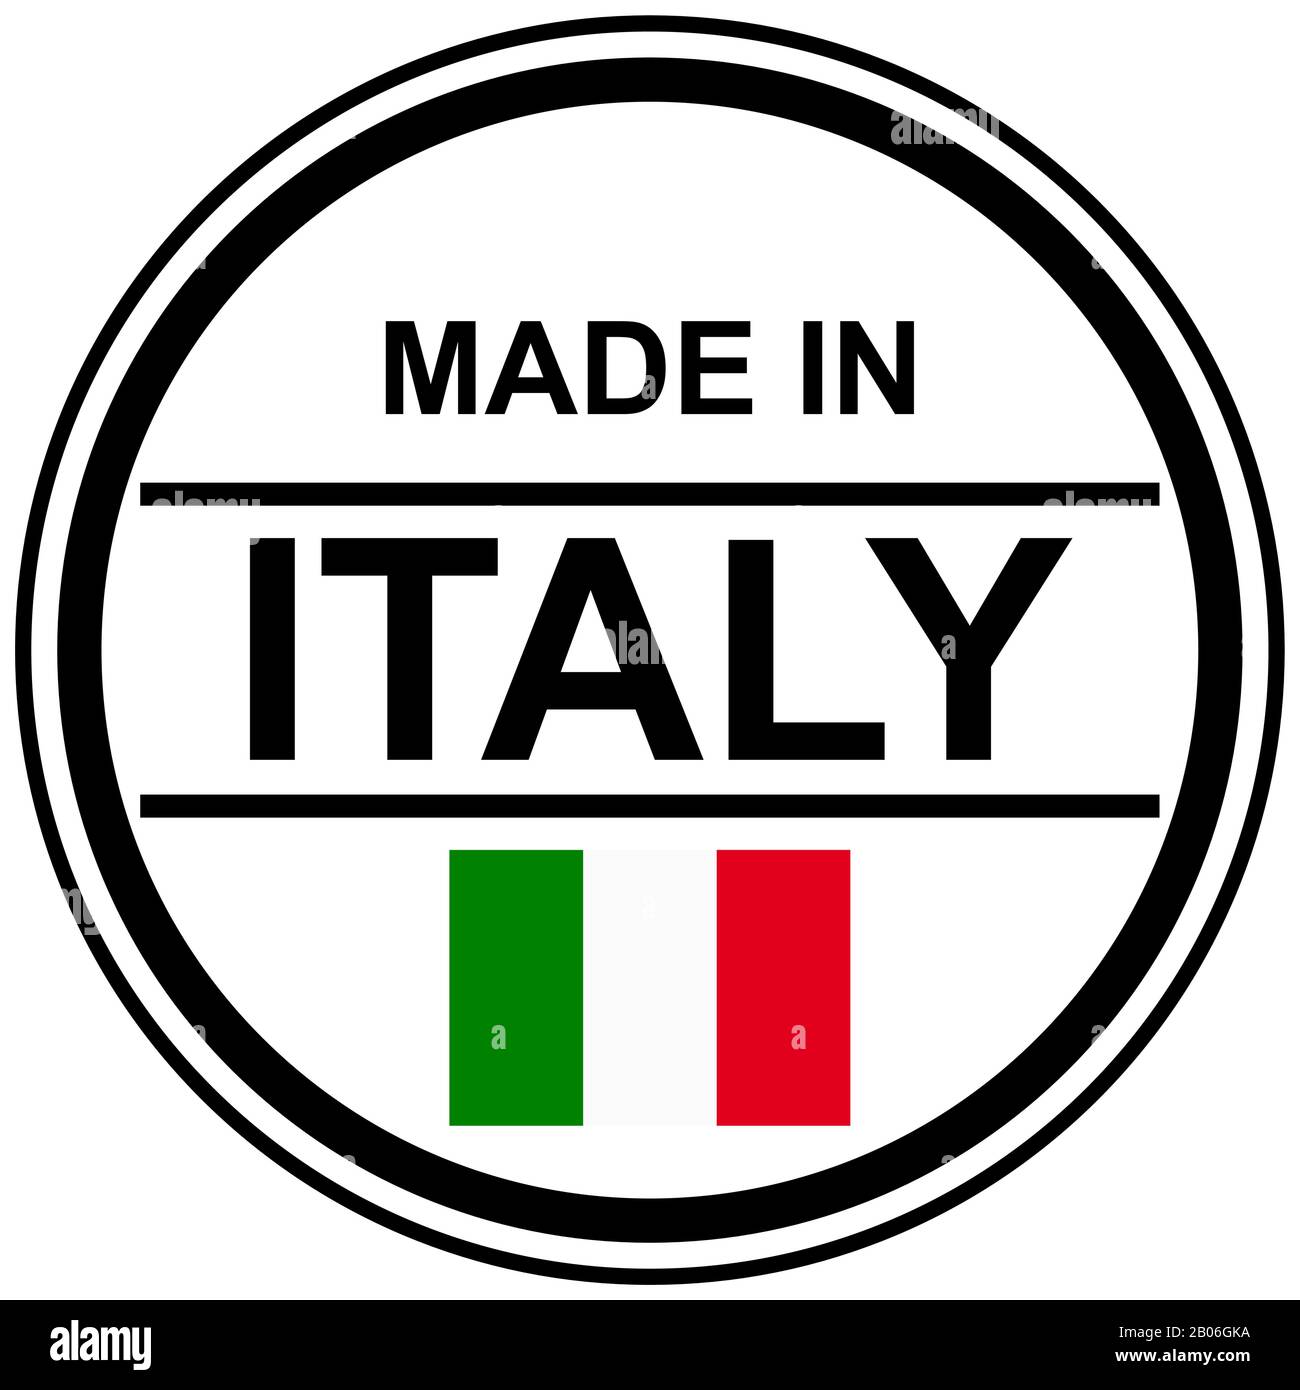 round stamp with text Made in Italy and country flag Stock Vector